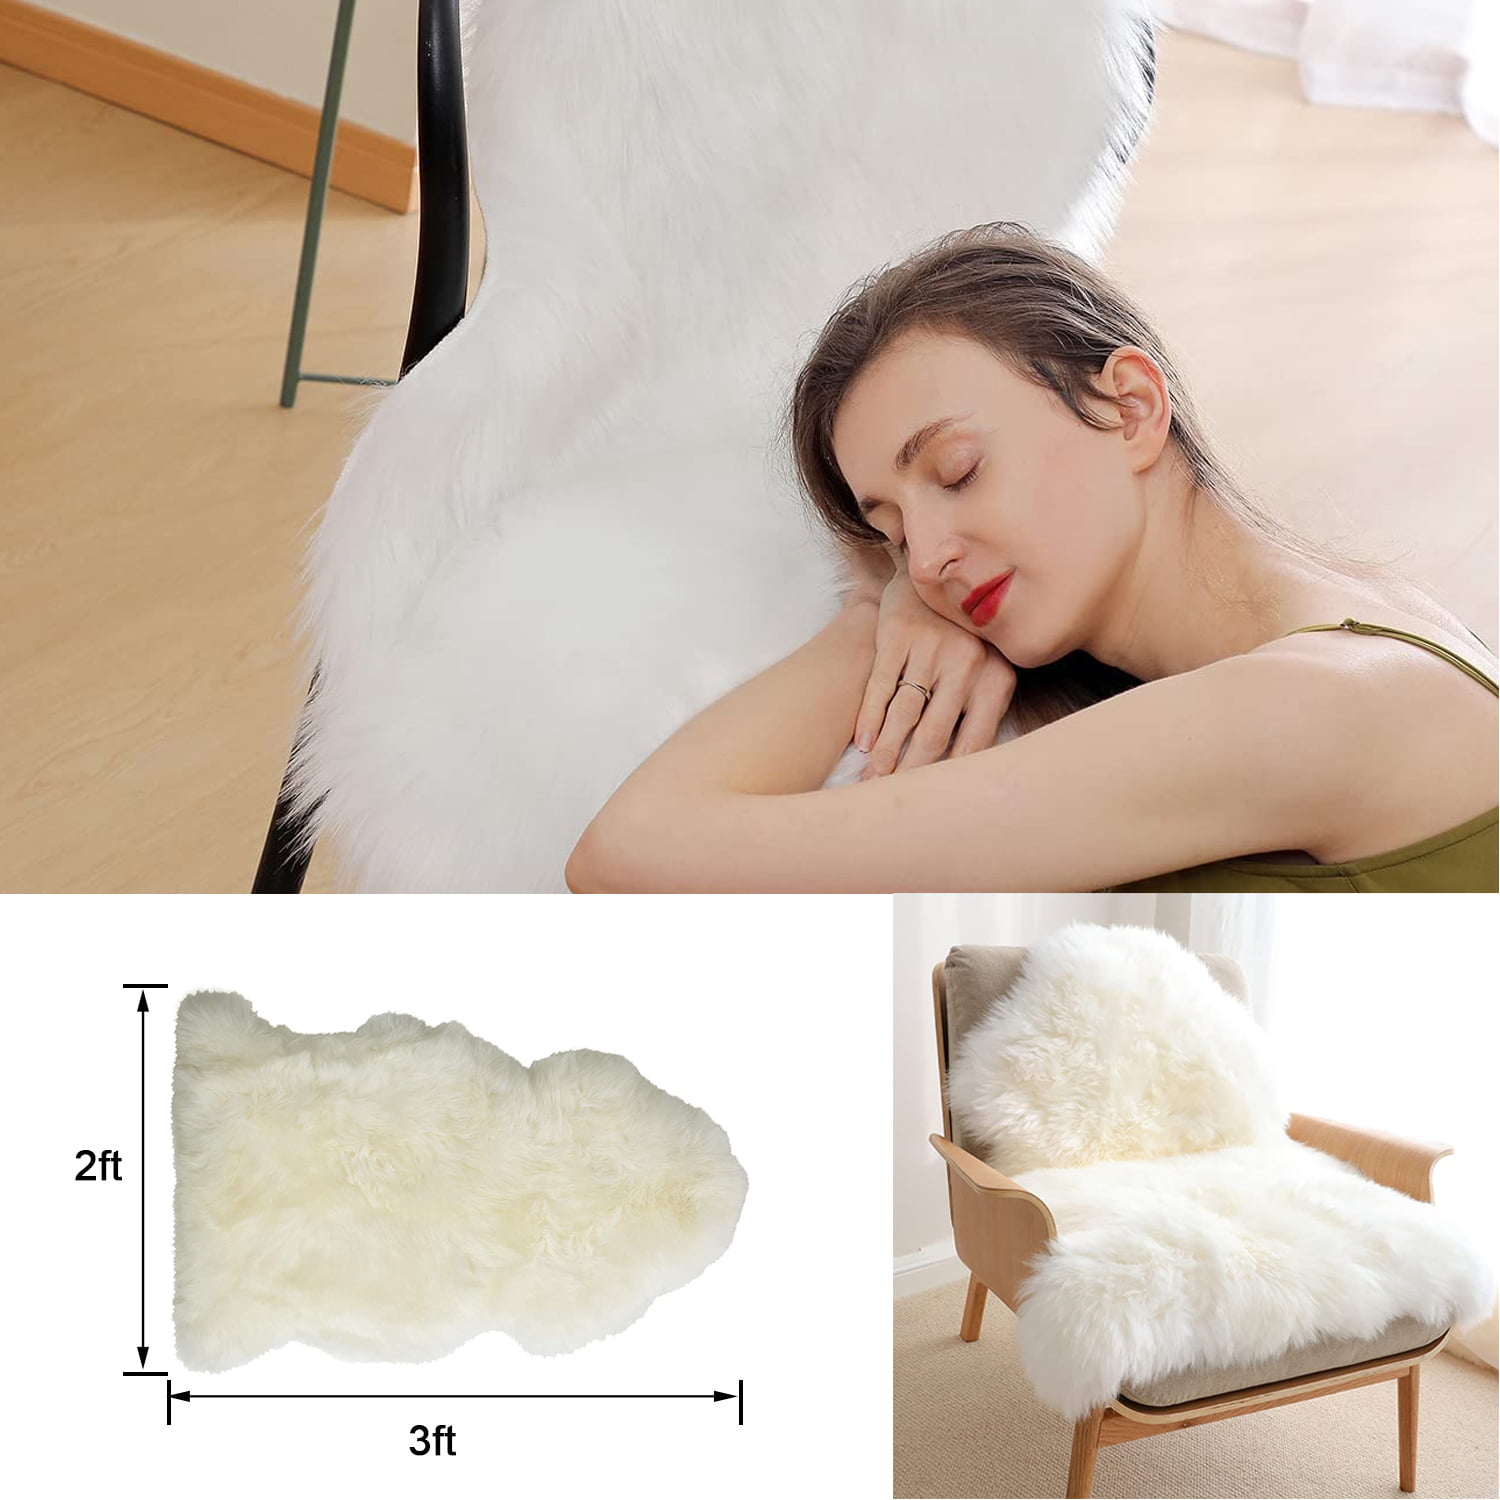 Sheepskin Throw Rug – Faux Fur 2x5-foot High Pile Runner – Soft And Plush  Mat For Bedroom, Kitchen, Bathroom, Nursery & Office By Lavish Home (white)  : Target